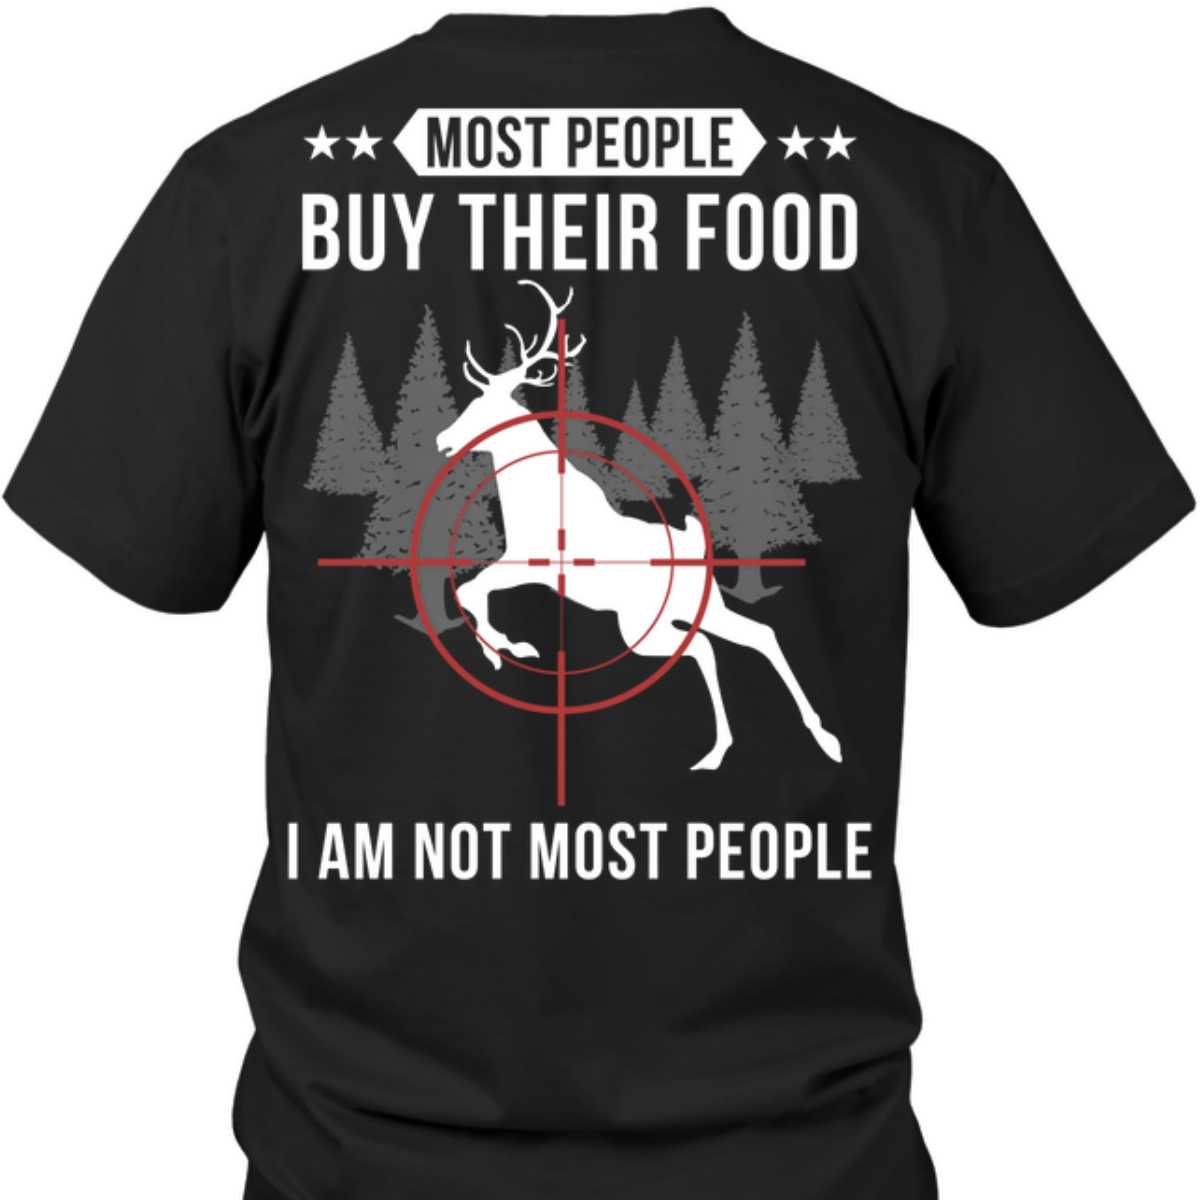 Most people buy their food I am not most people - Hunting animal, the hunter